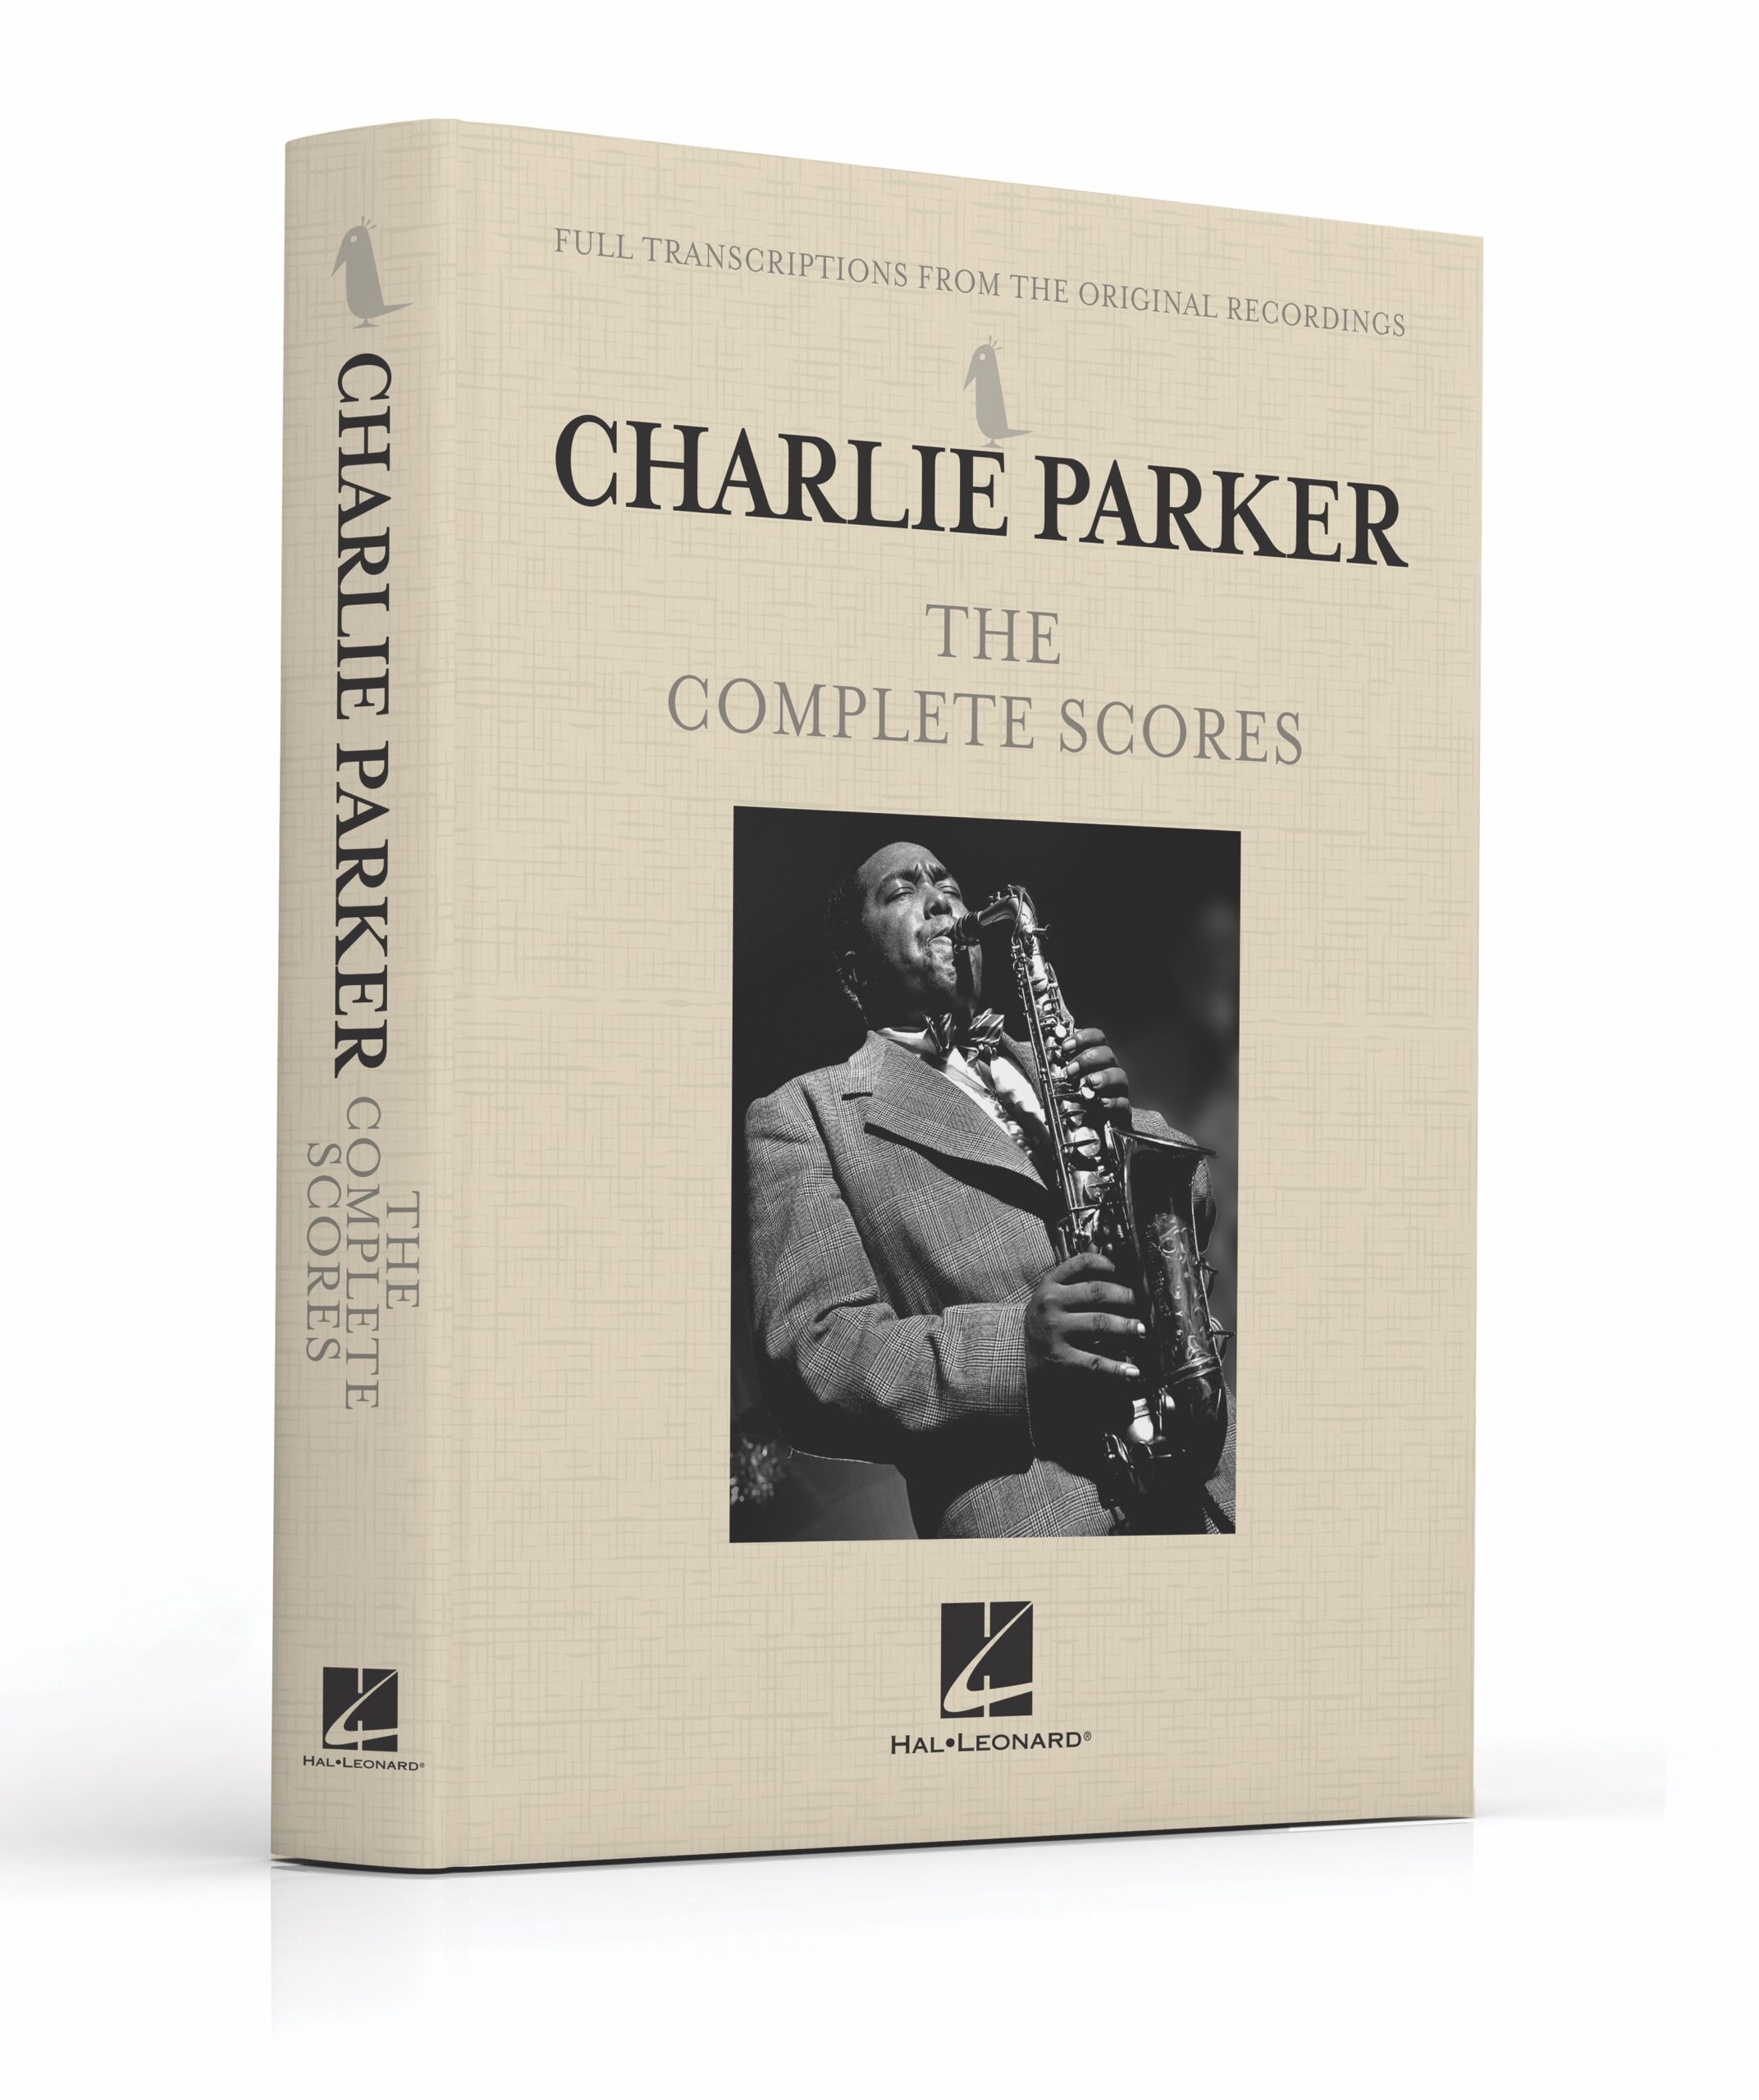 We Are Proud To Announce Charlie Parker: The Complete Scores Boxed Set